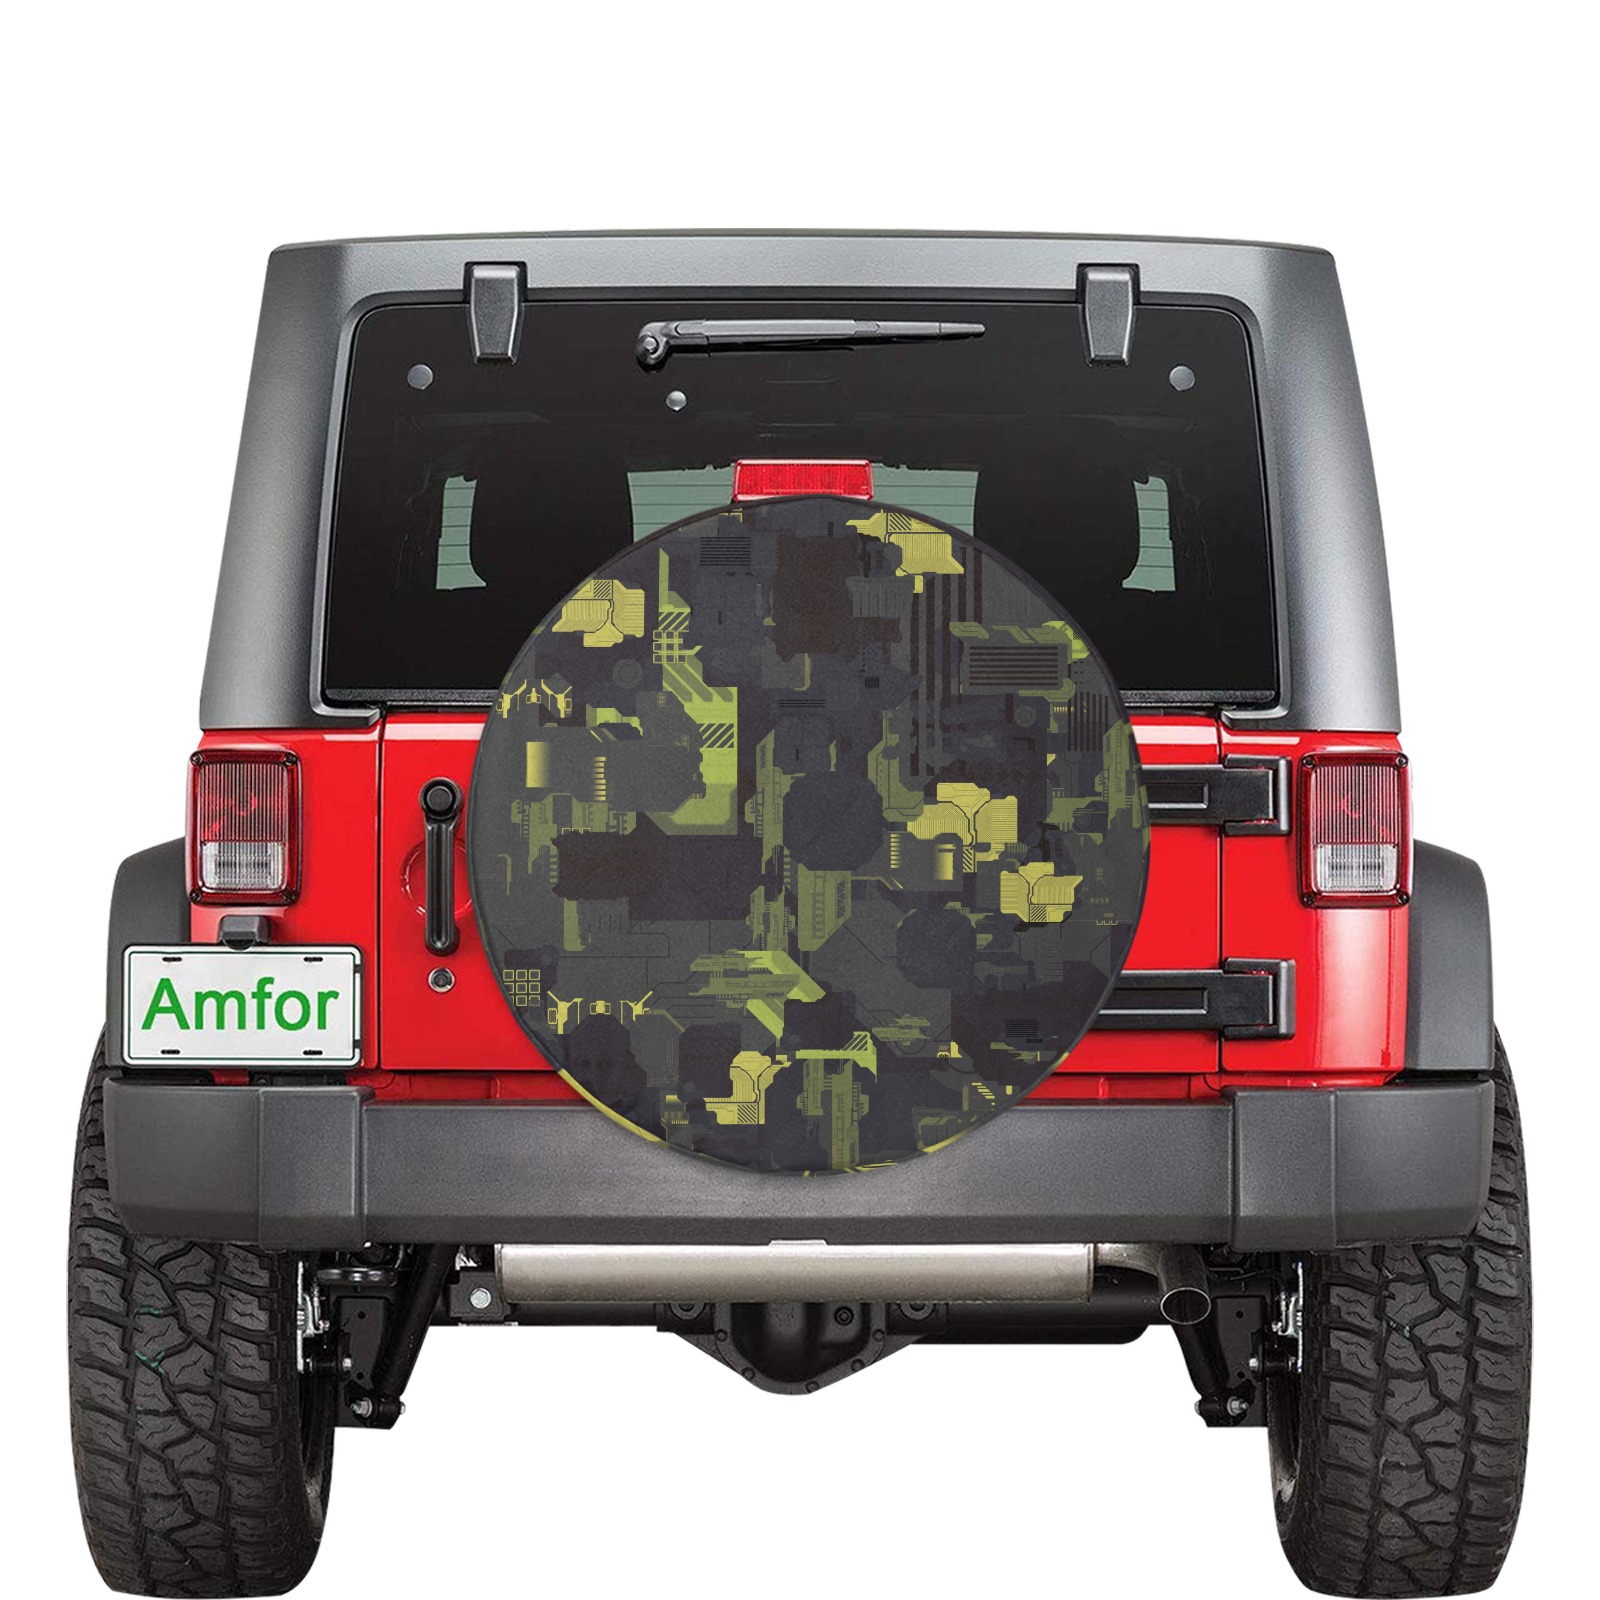 Urban Camouflage 32 Inch Spare Tire Cover